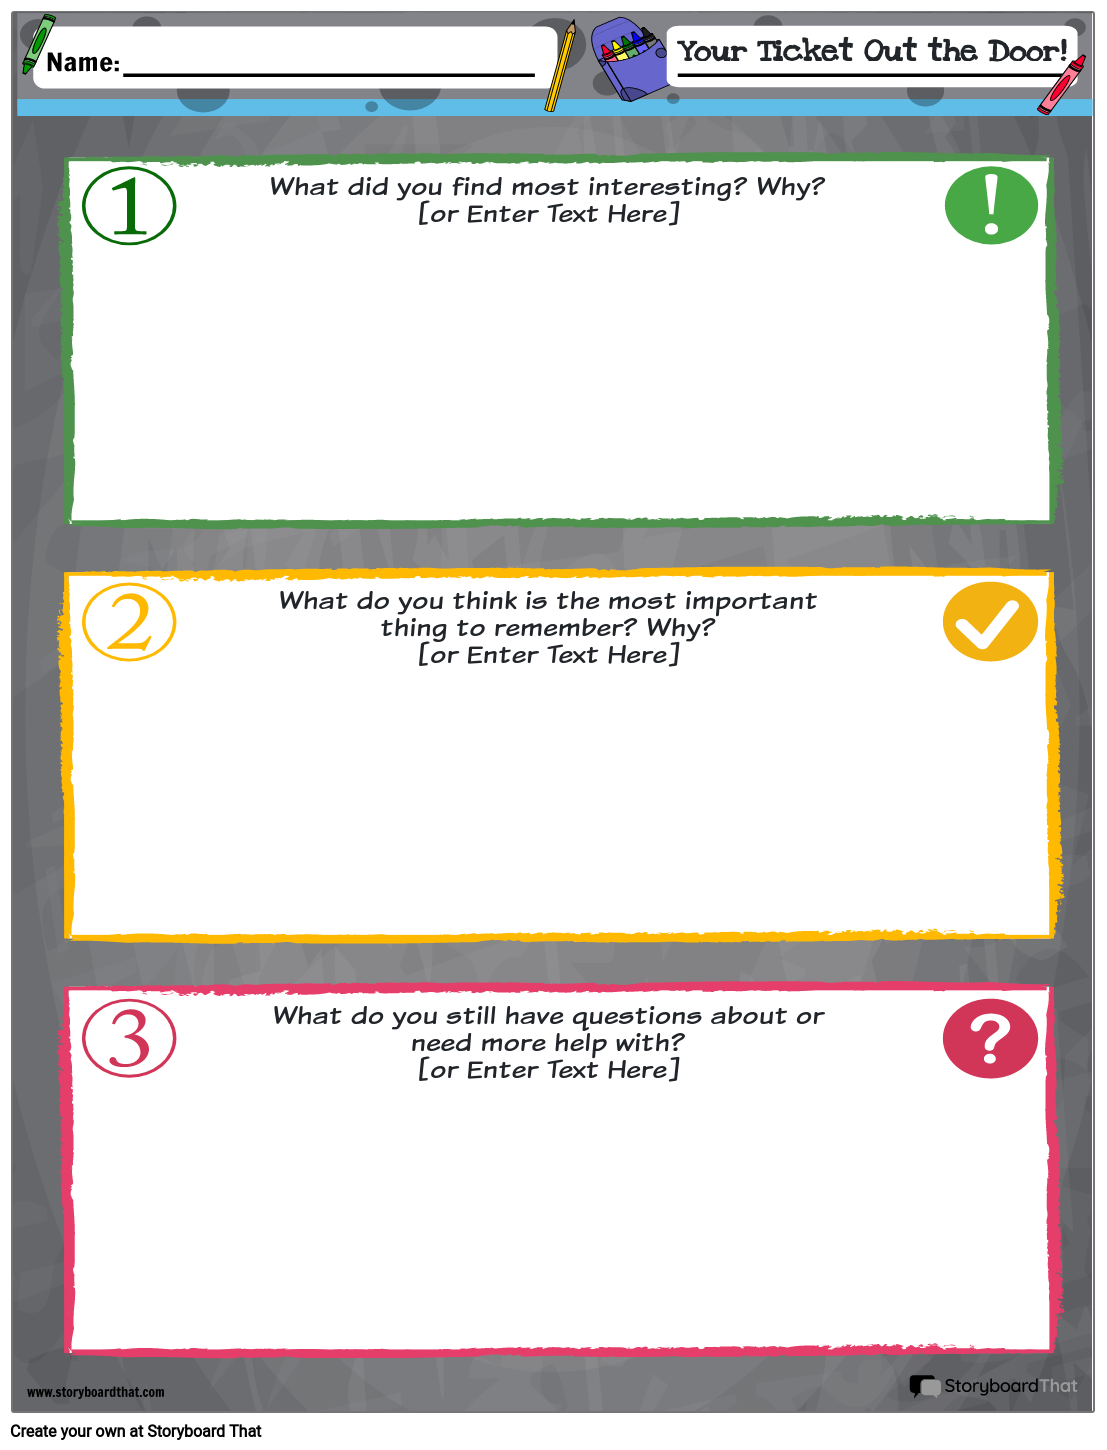 create an exit ticket exit ticket template and ideas